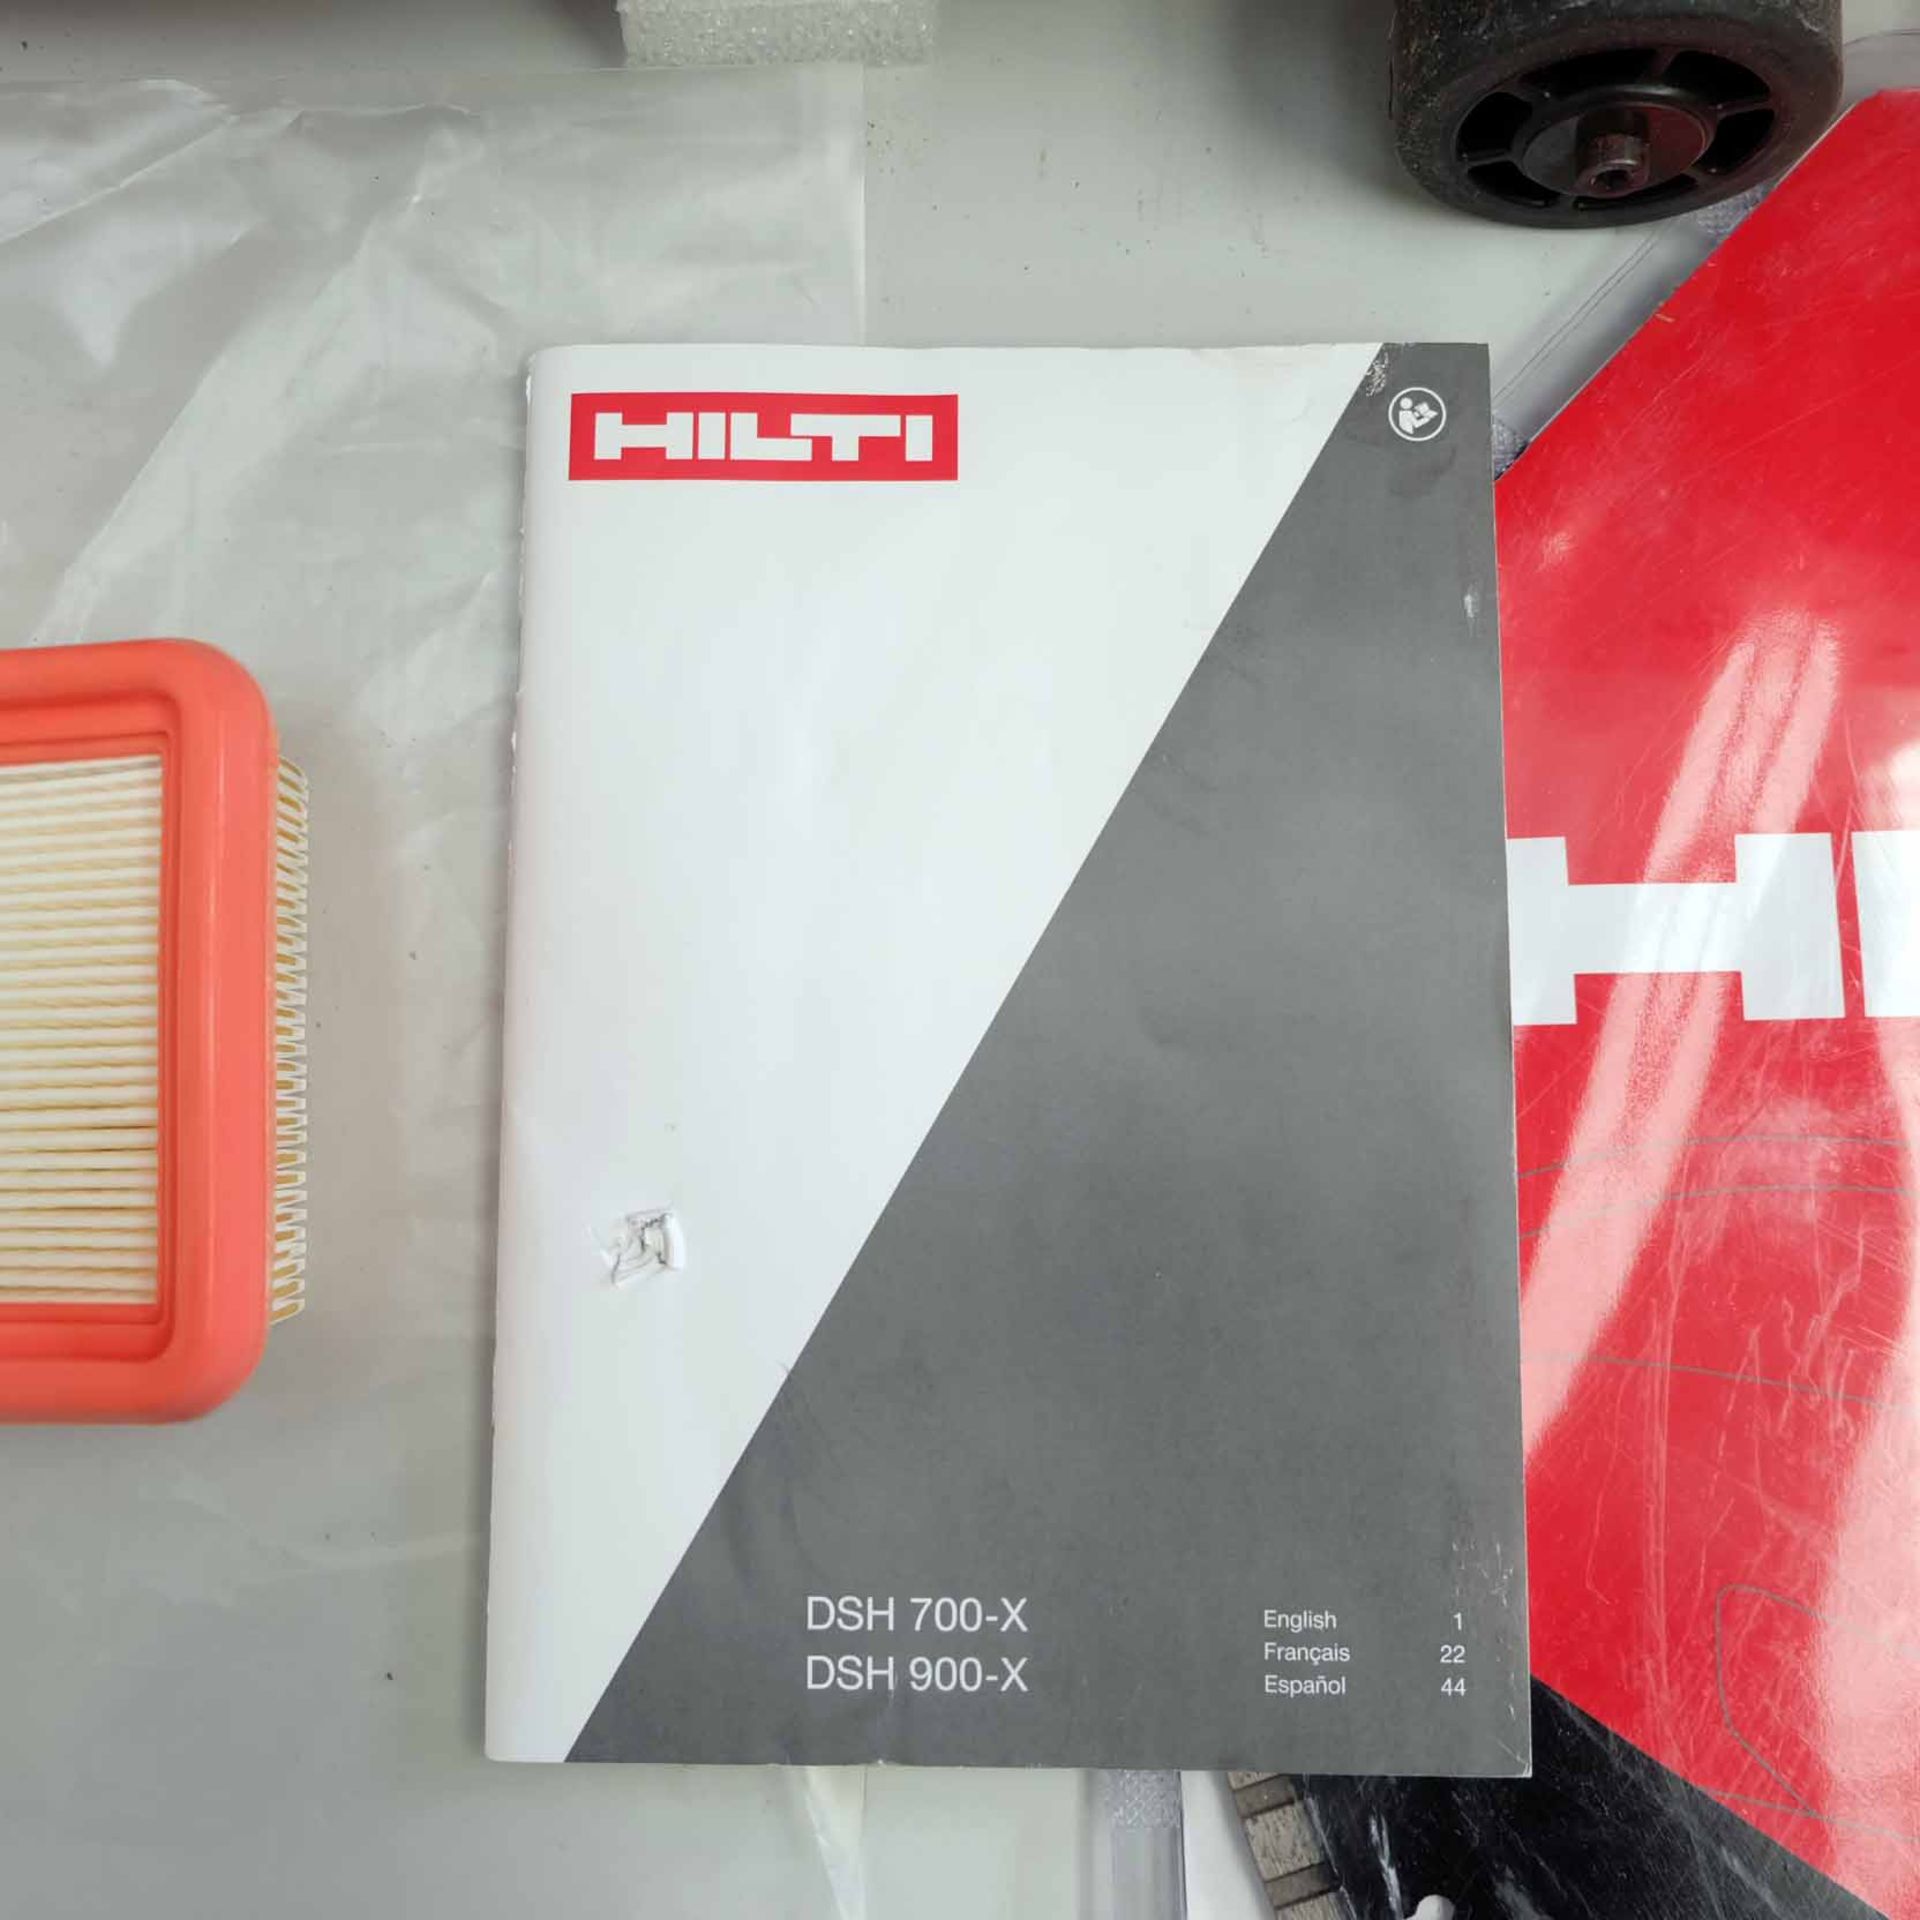 Hilti Hand Held Gas Saw. Model DSH 900-X 16". Complete With SP-16"x1" Blade. Easy Start Auto-Choke S - Image 18 of 25